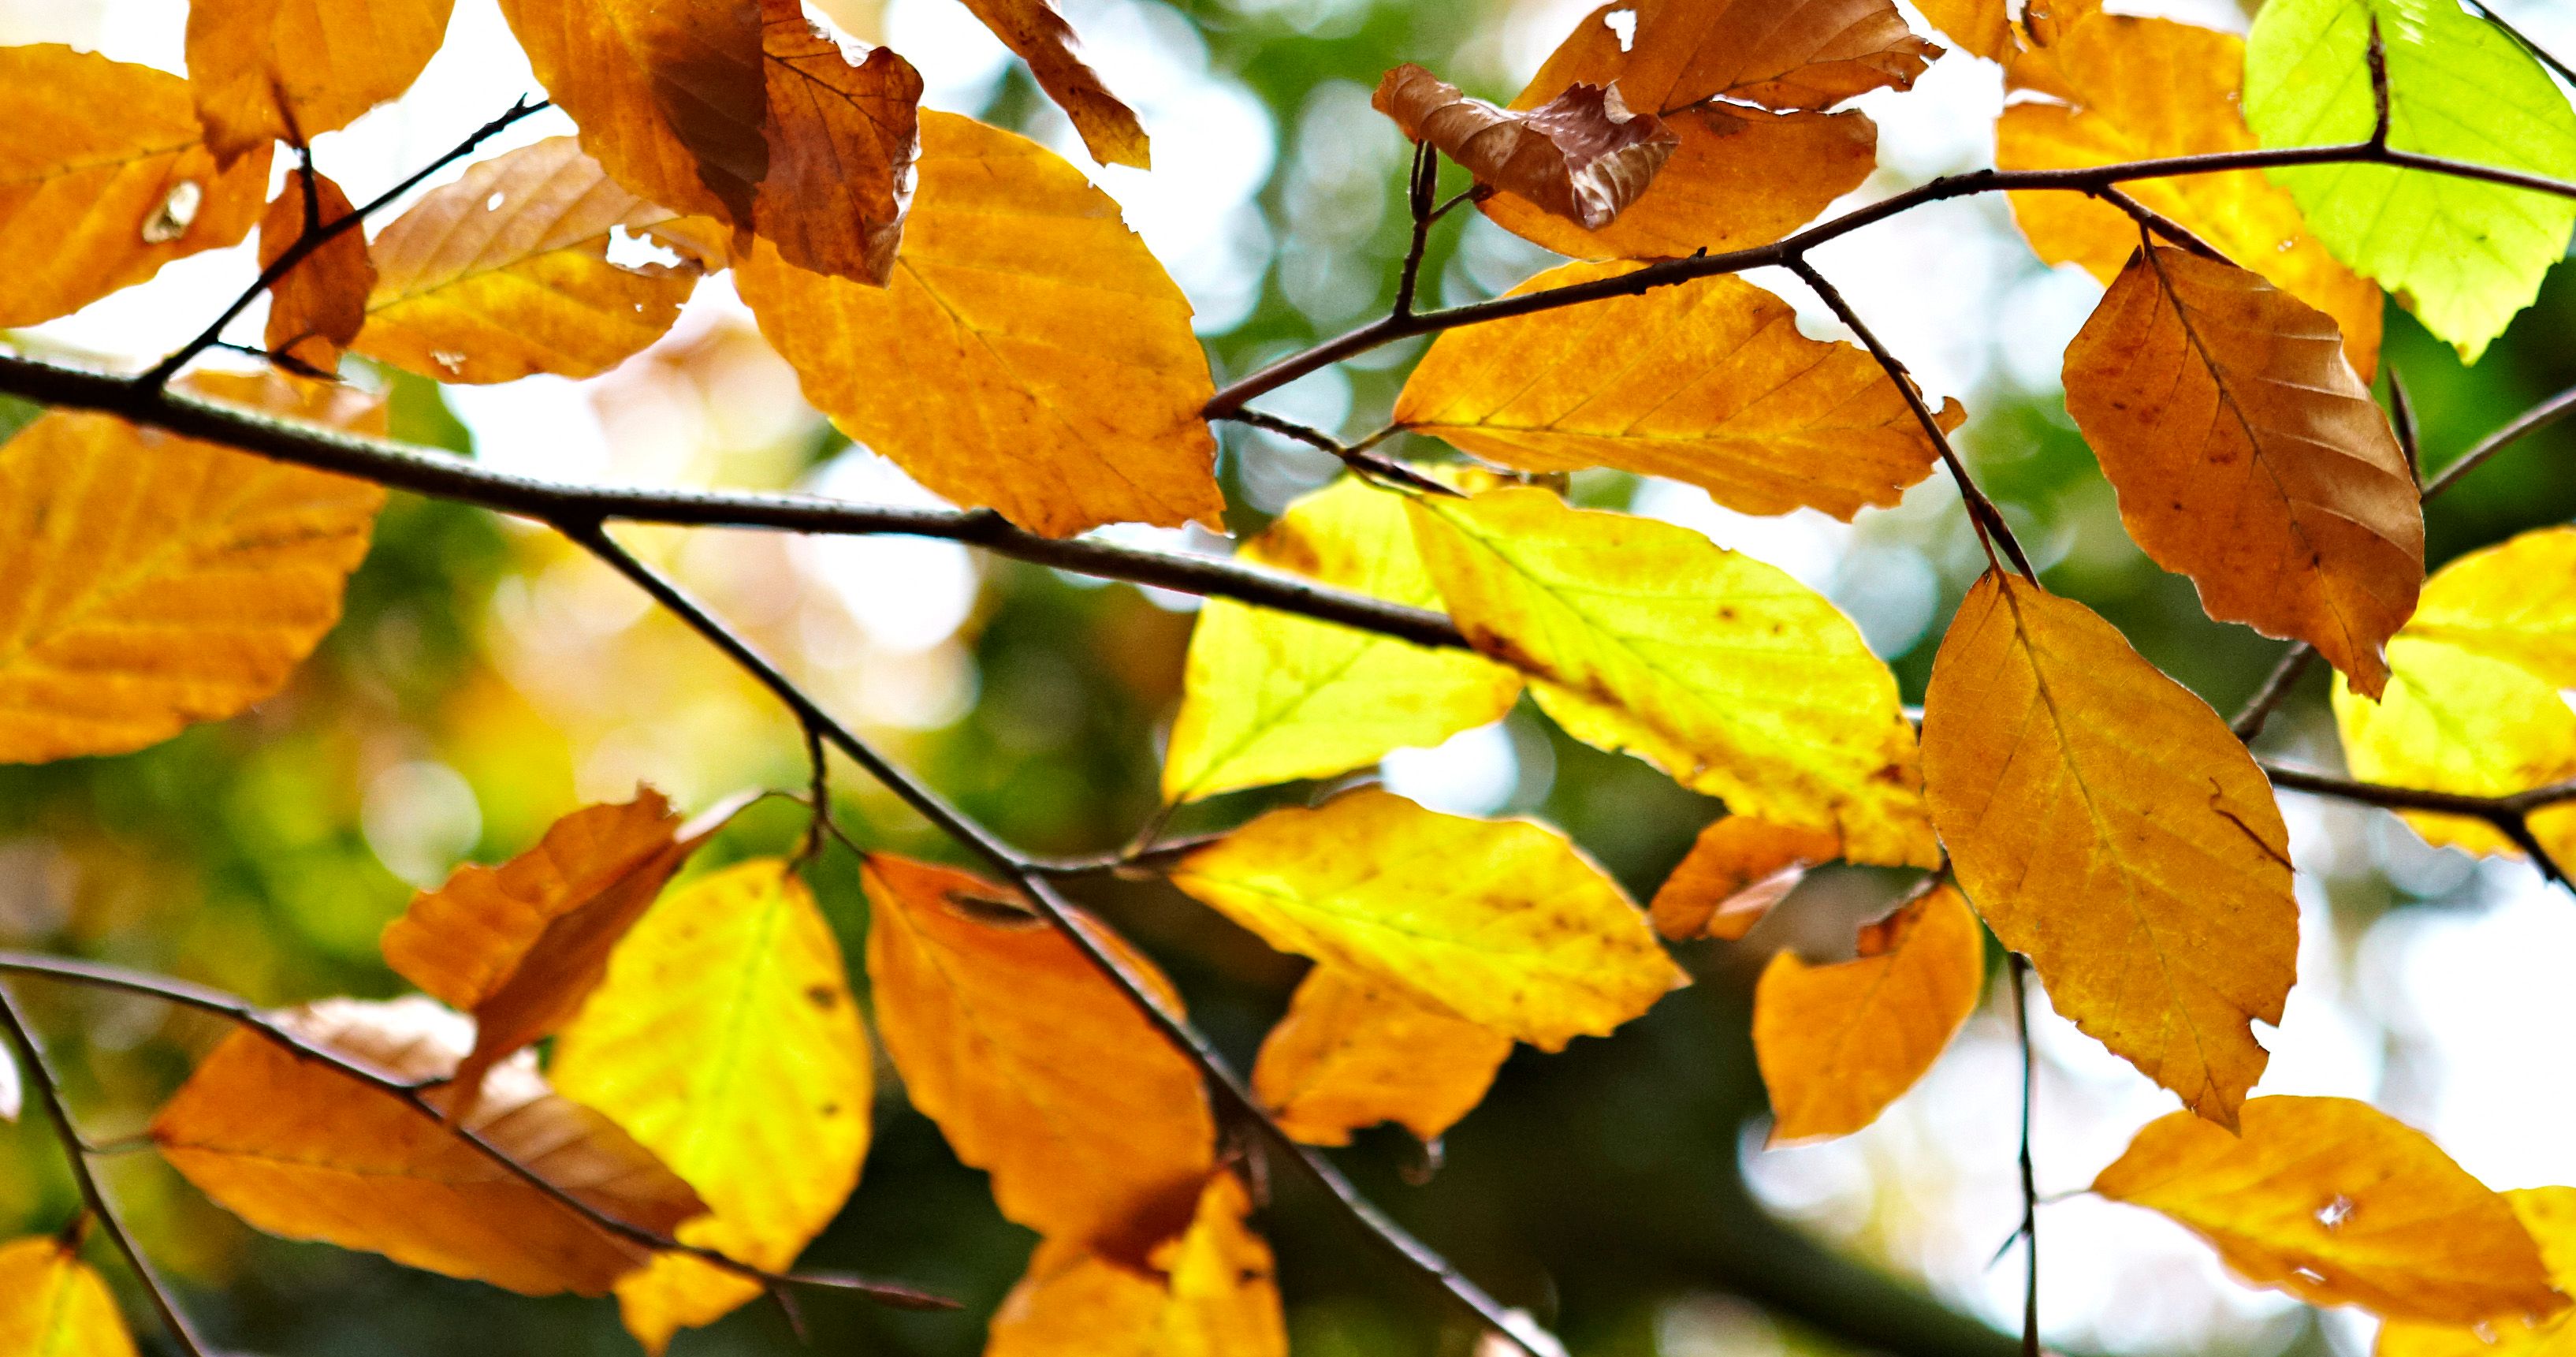 Autumn gardening ideas: Things to do in October | Ideas & Advice ...